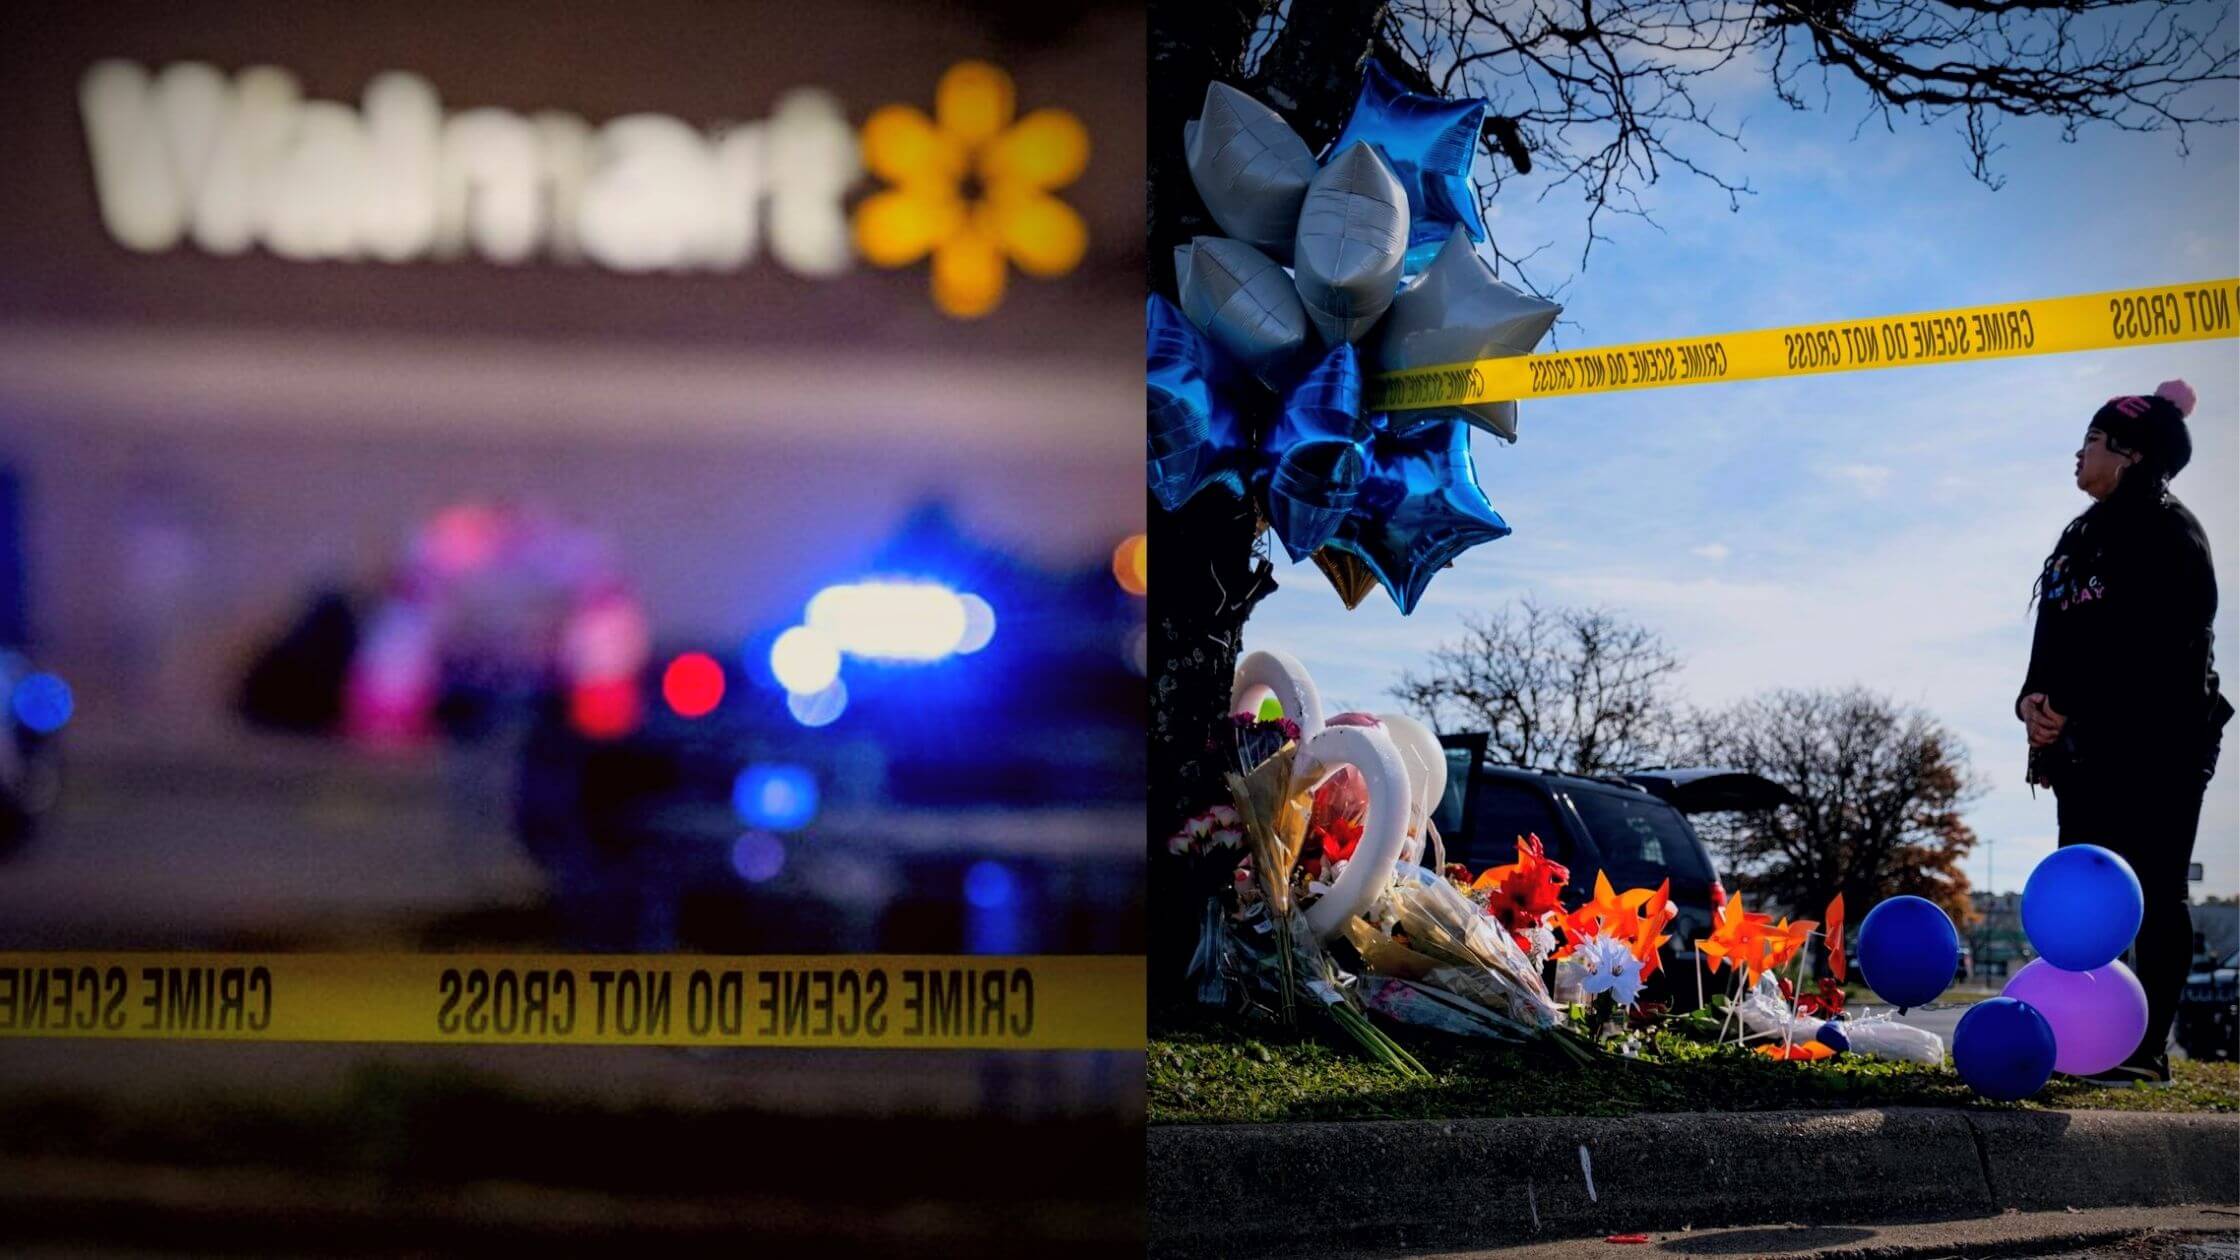 What Is Known About The Virginia Walmart Shooting Victims